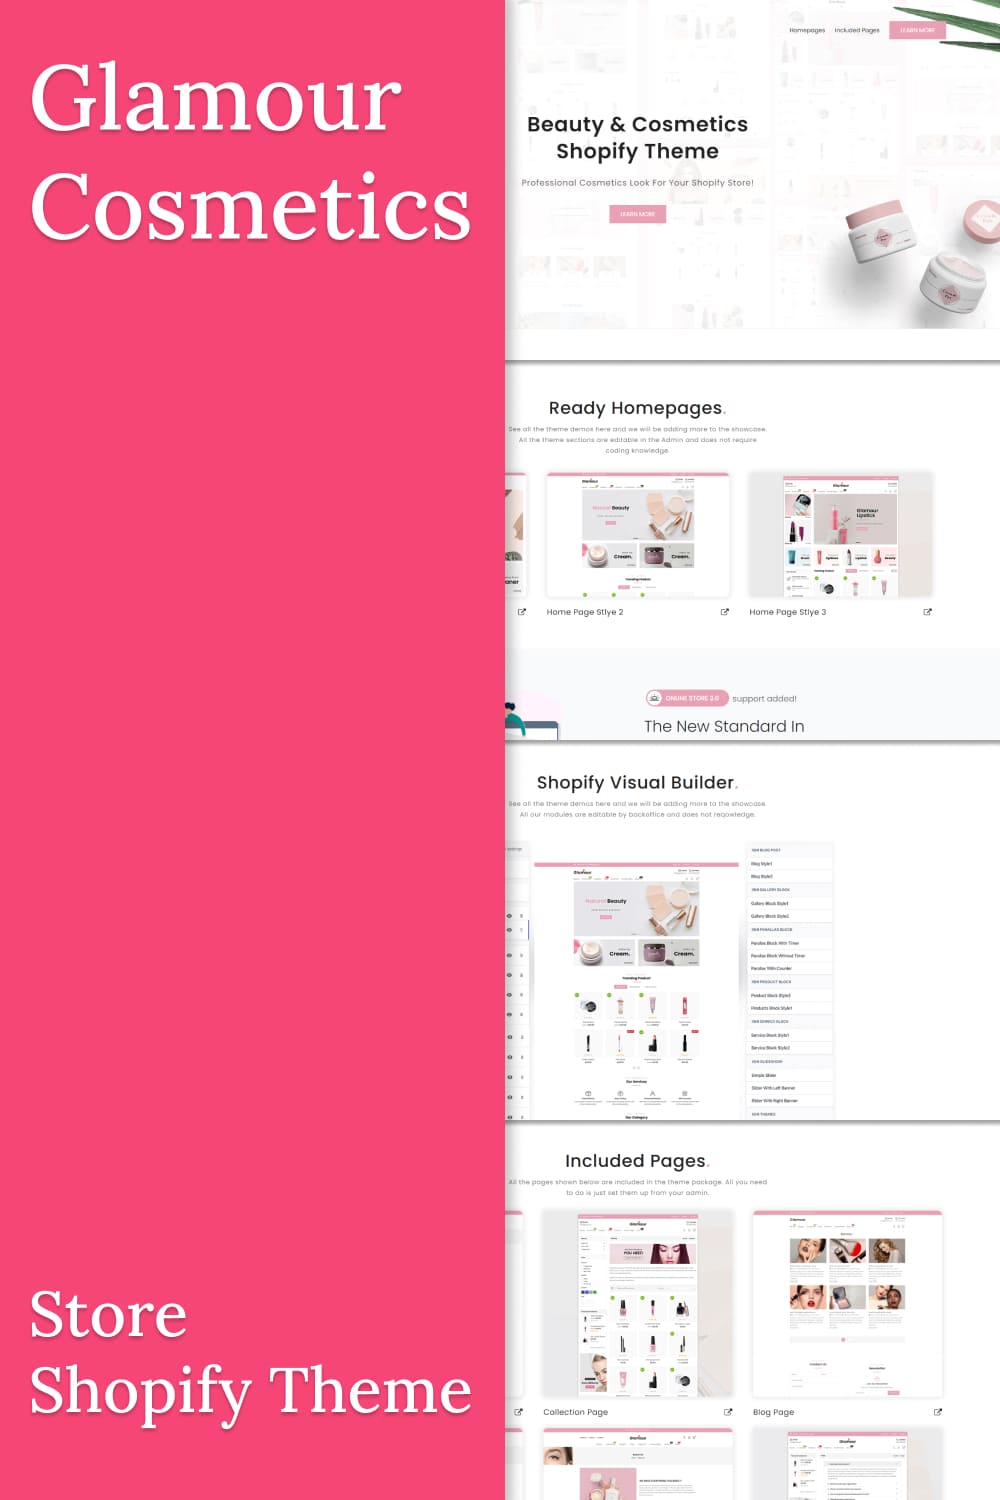 Glamour cosmetics store shopify theme, picture for pinterest 1000x1500.